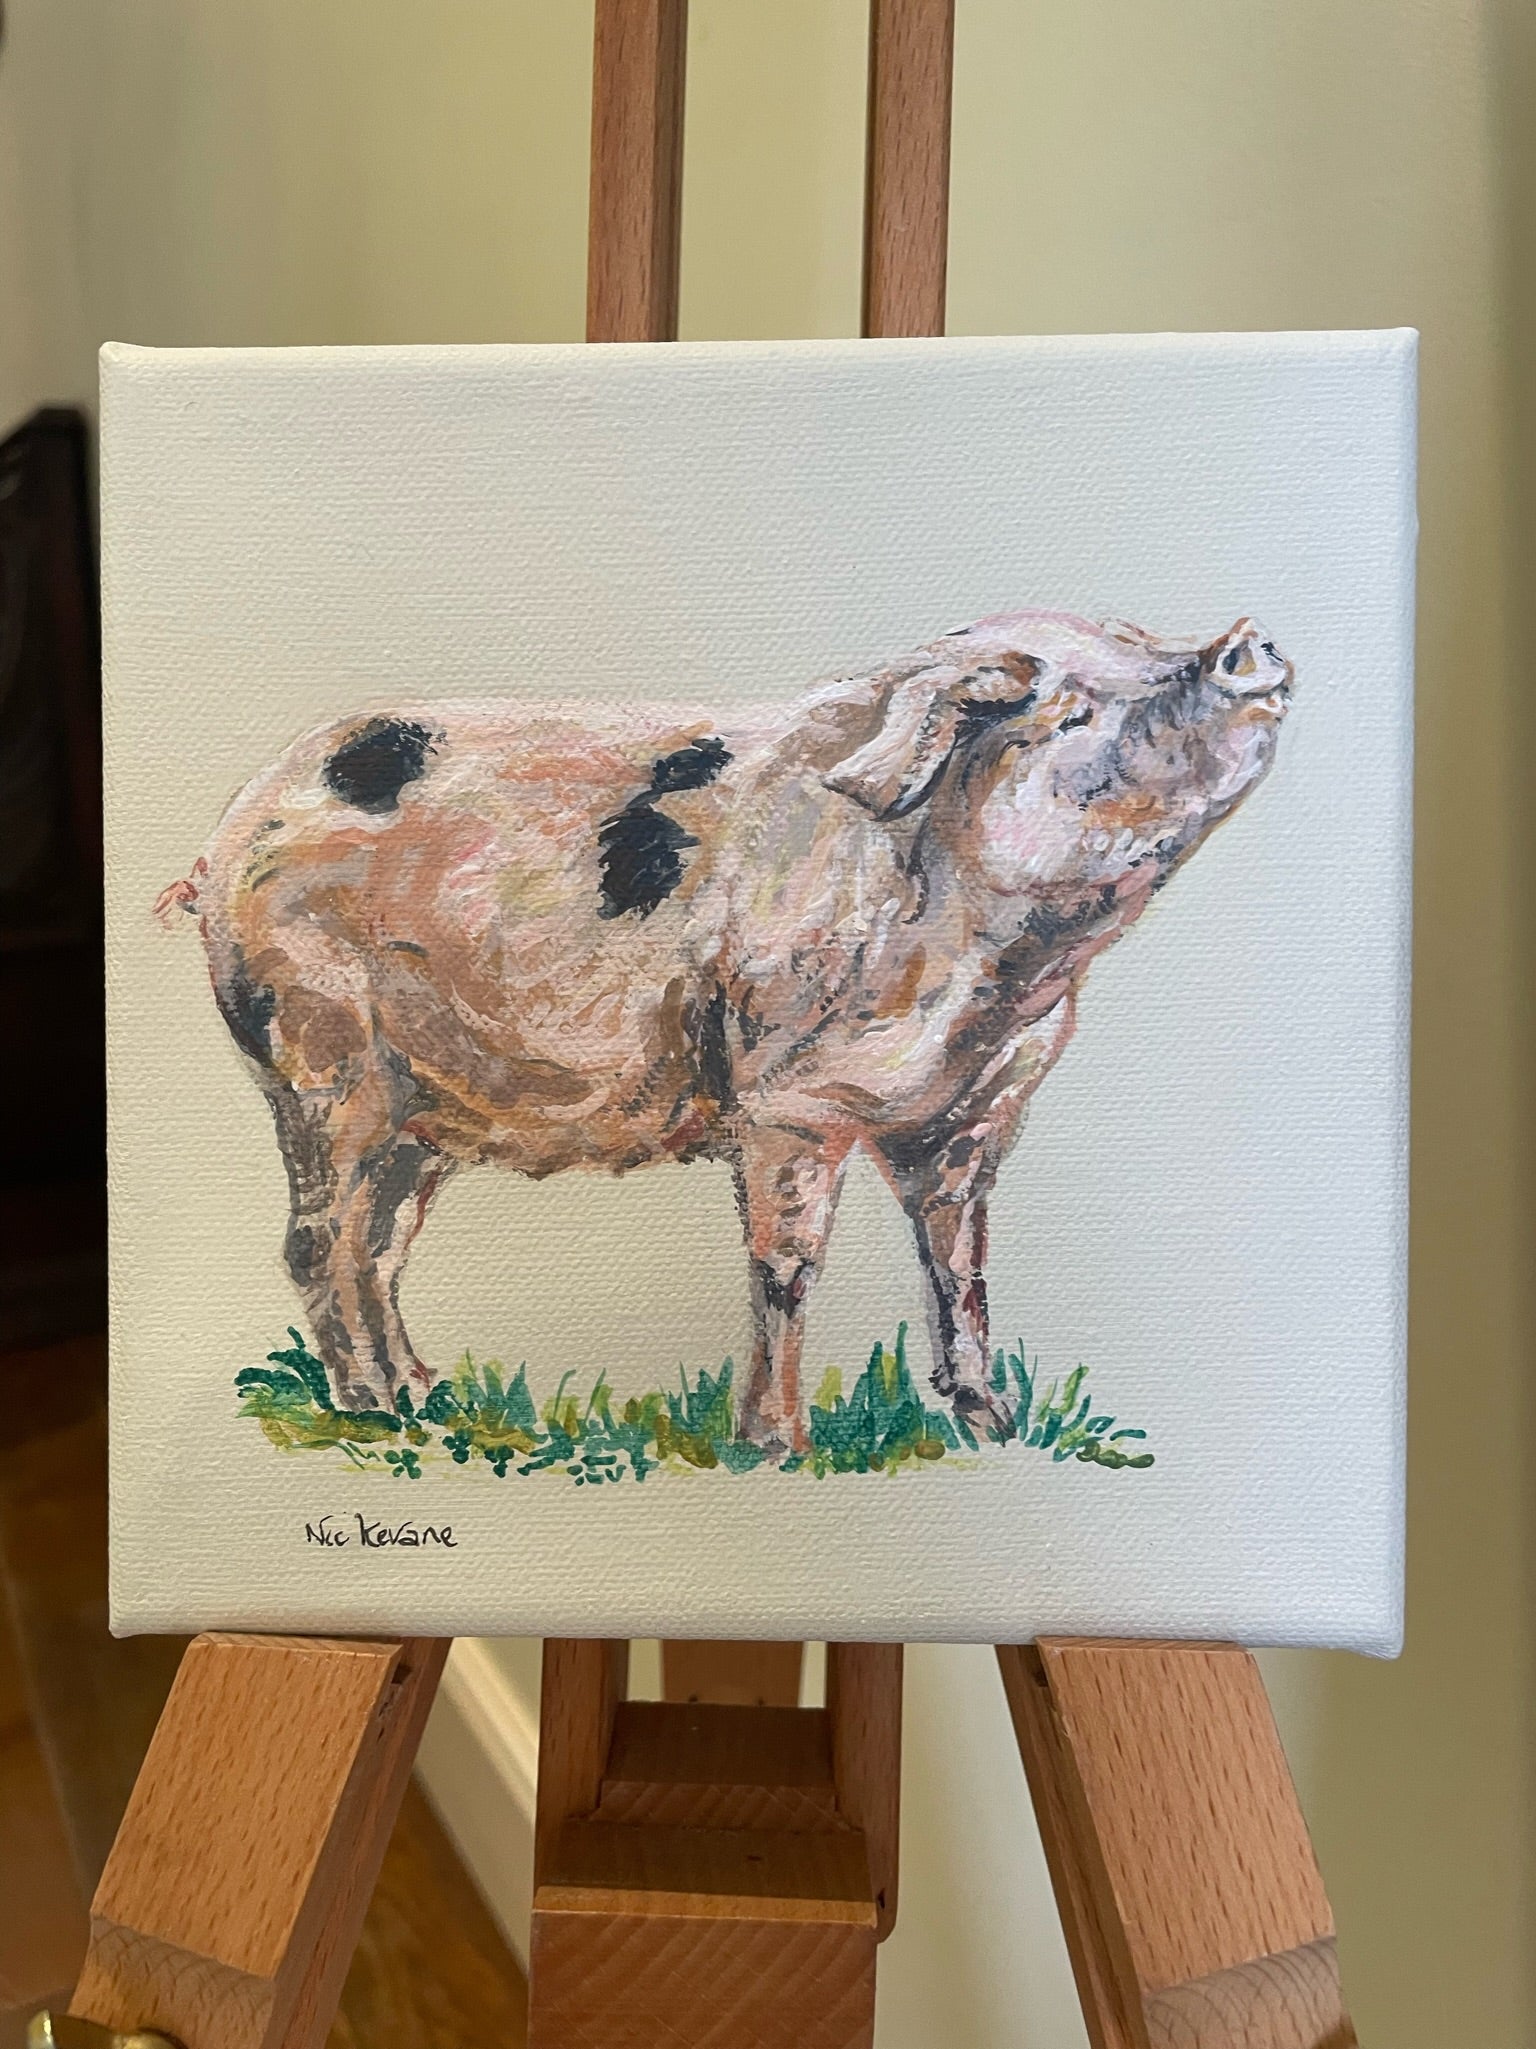 Gloucester Old Spot Pig - My mini paintings depict various countryside subjects painted on soft off-white backgrounds.